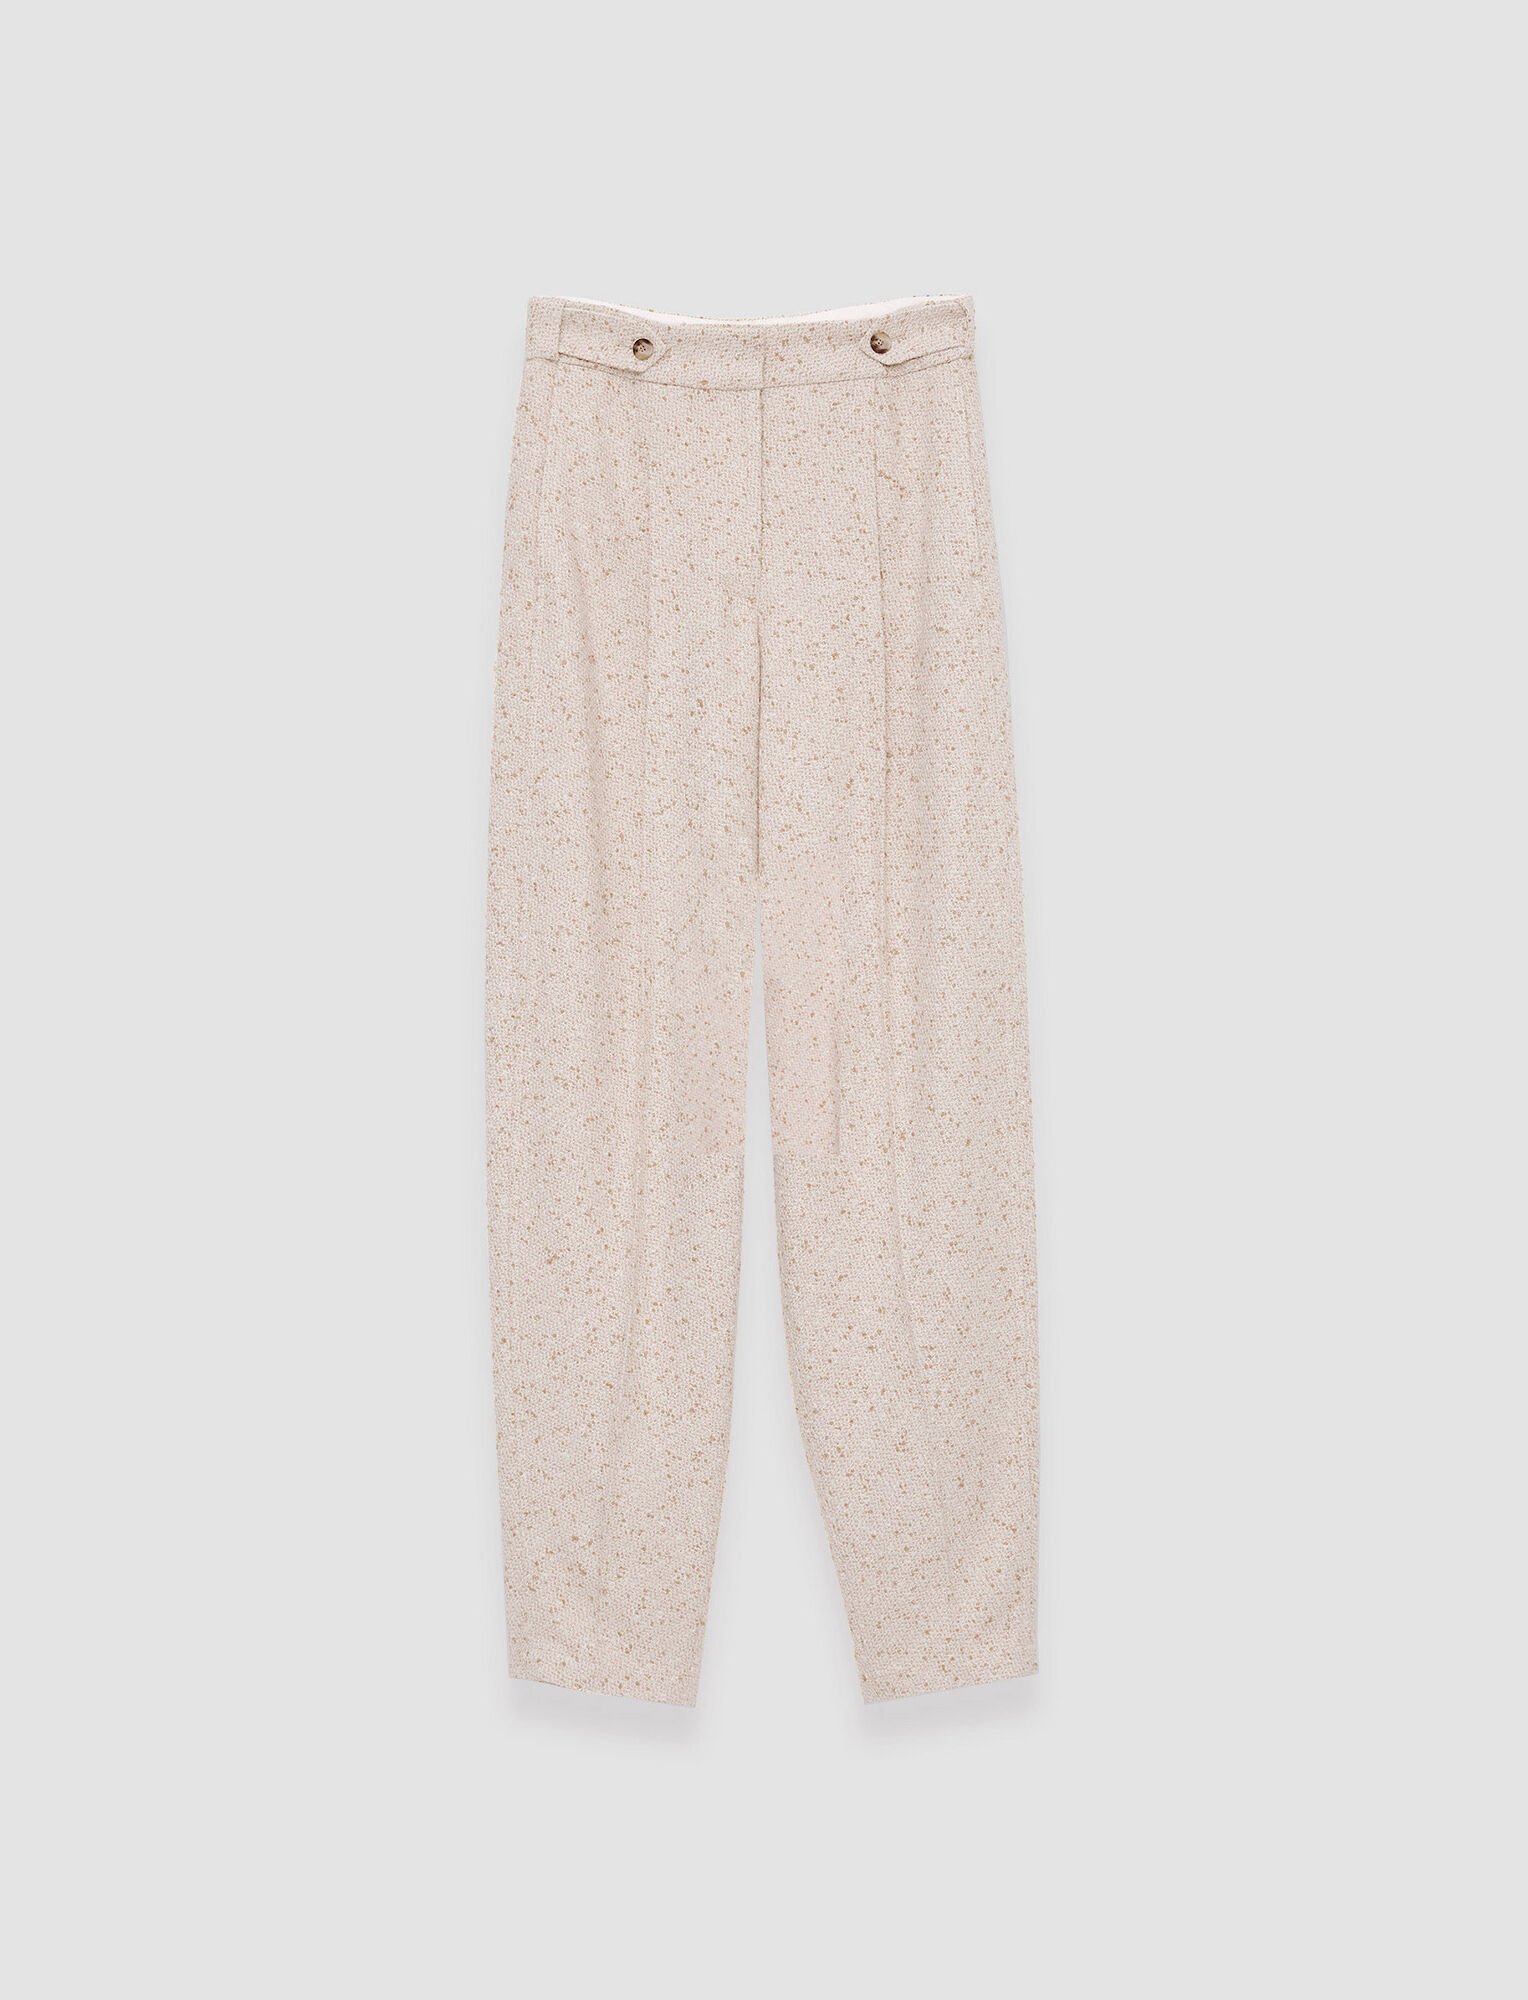 Joseph, Tweed Timothy Trousers, in Ivory/Clay